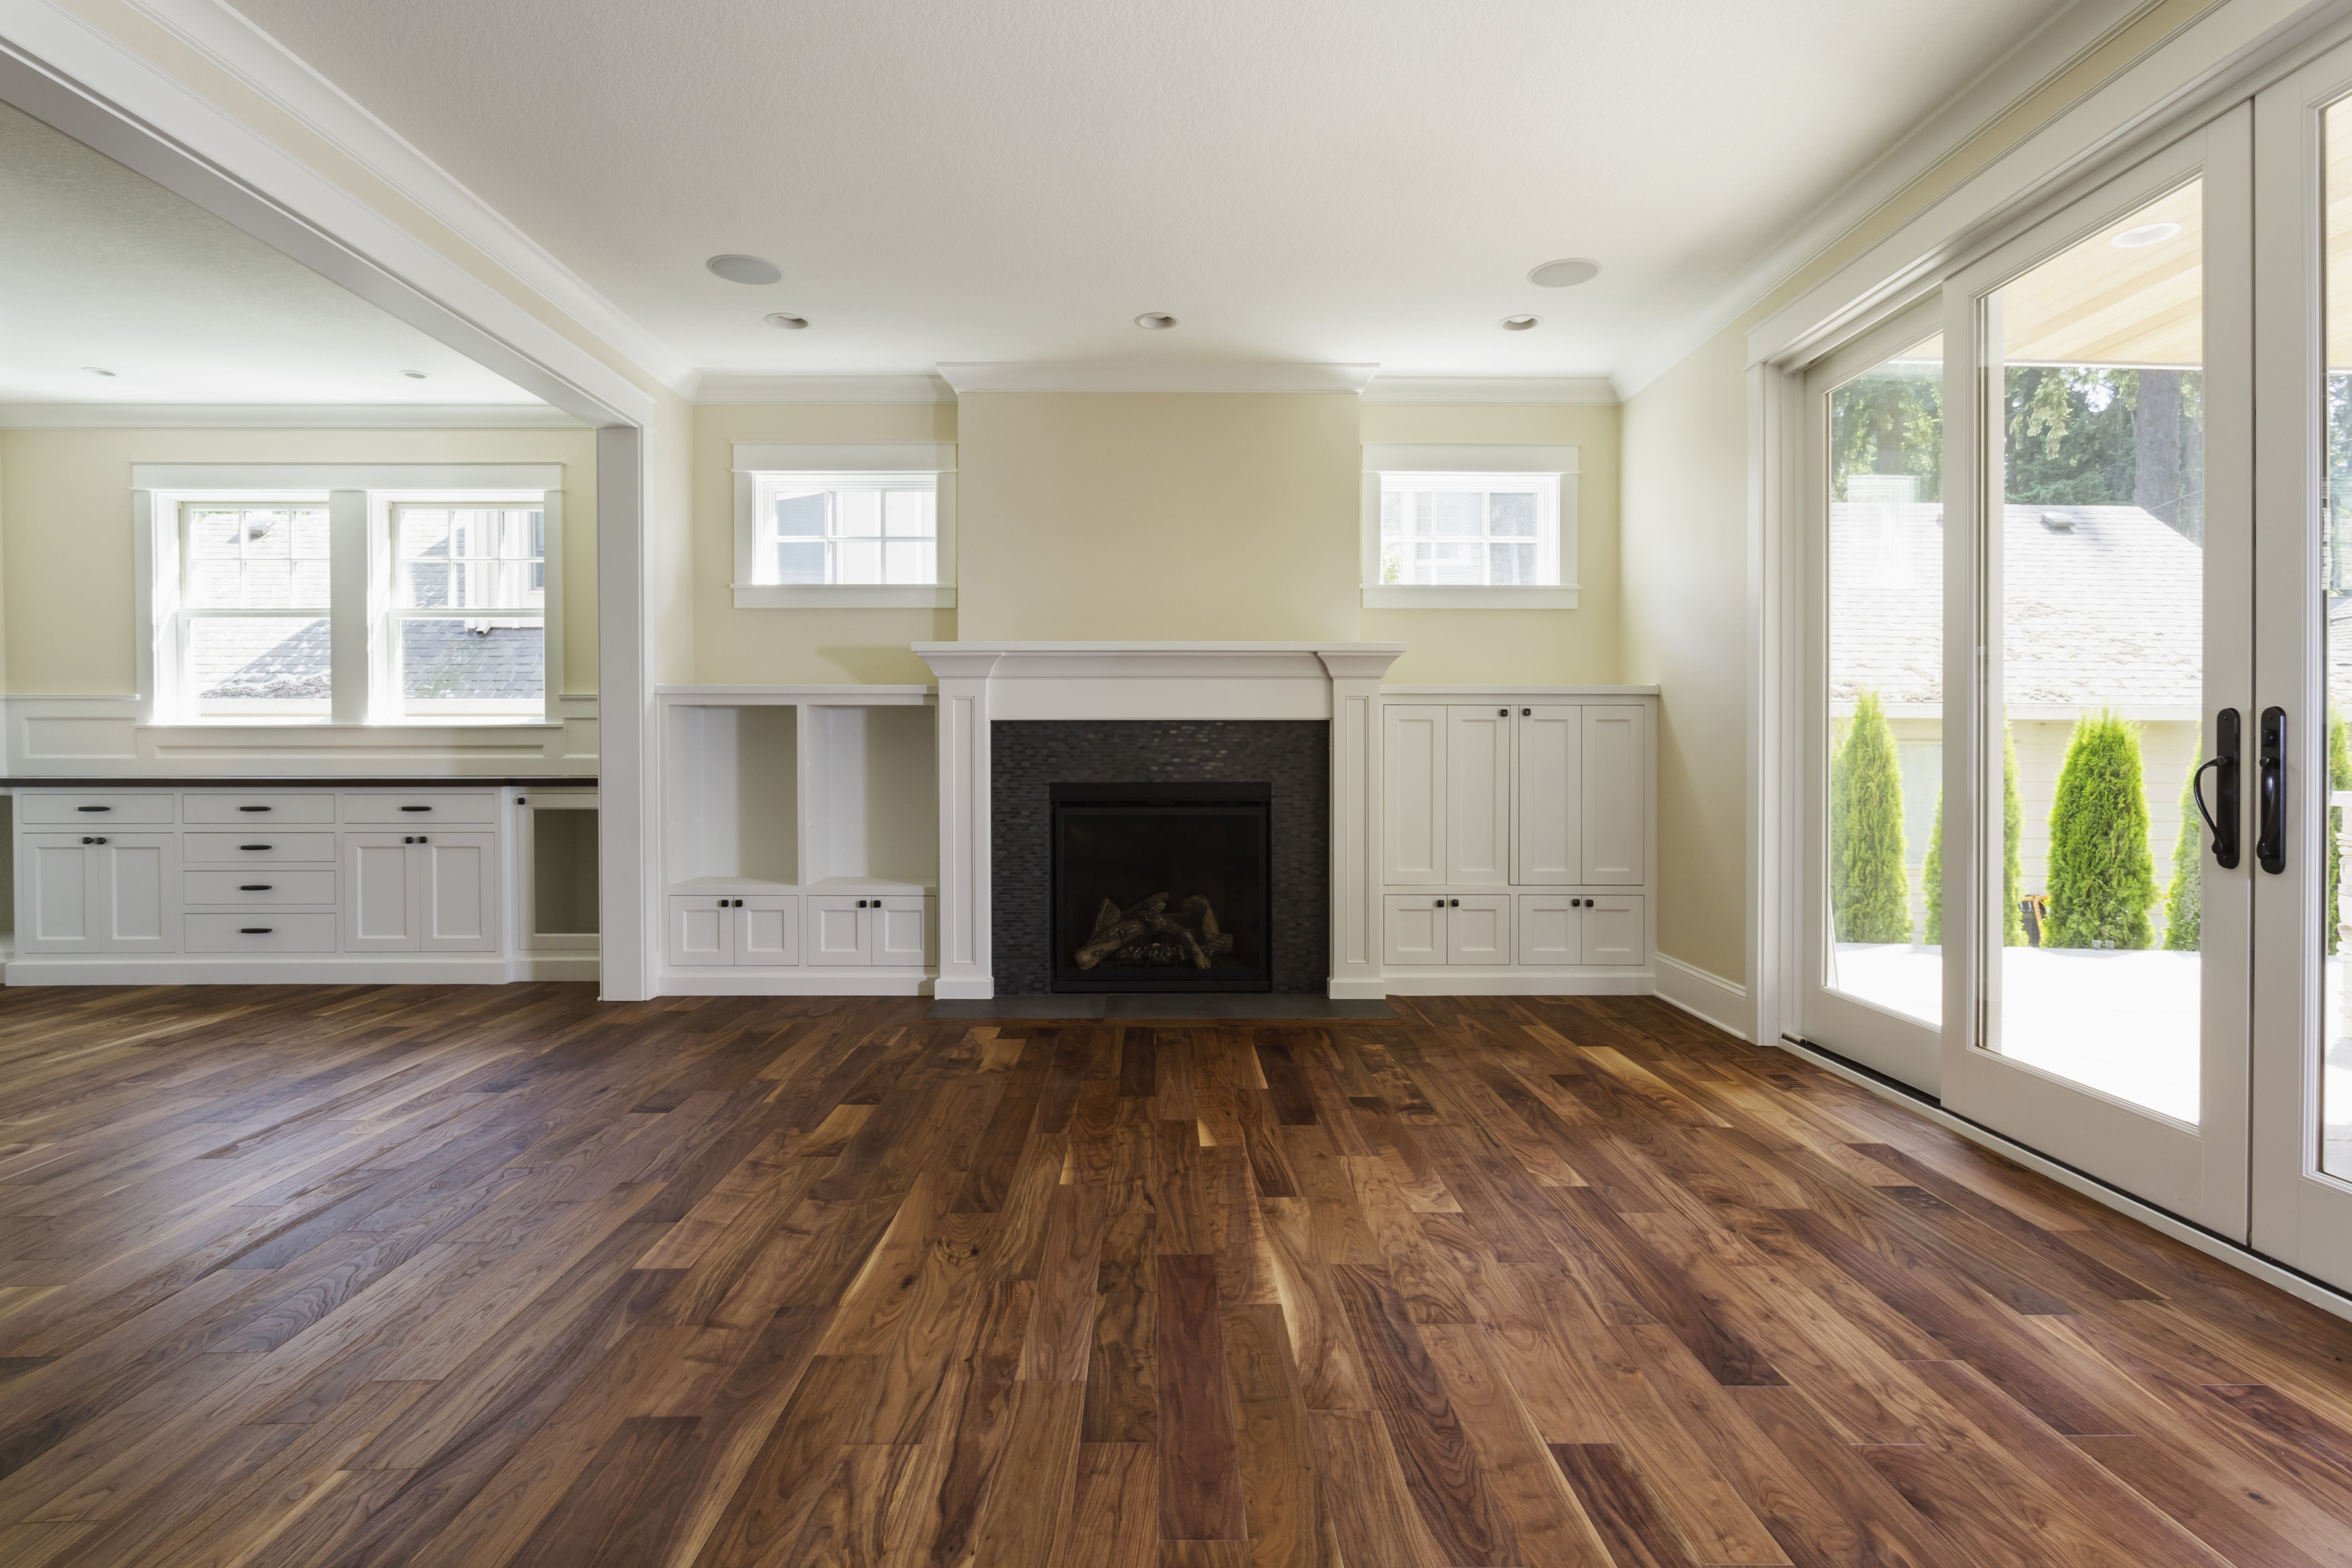 hardwood vs engineered flooring cost of the pros and cons of prefinished hardwood flooring regarding fireplace and built in shelves in living room 482143011 57bef8e33df78cc16e035397